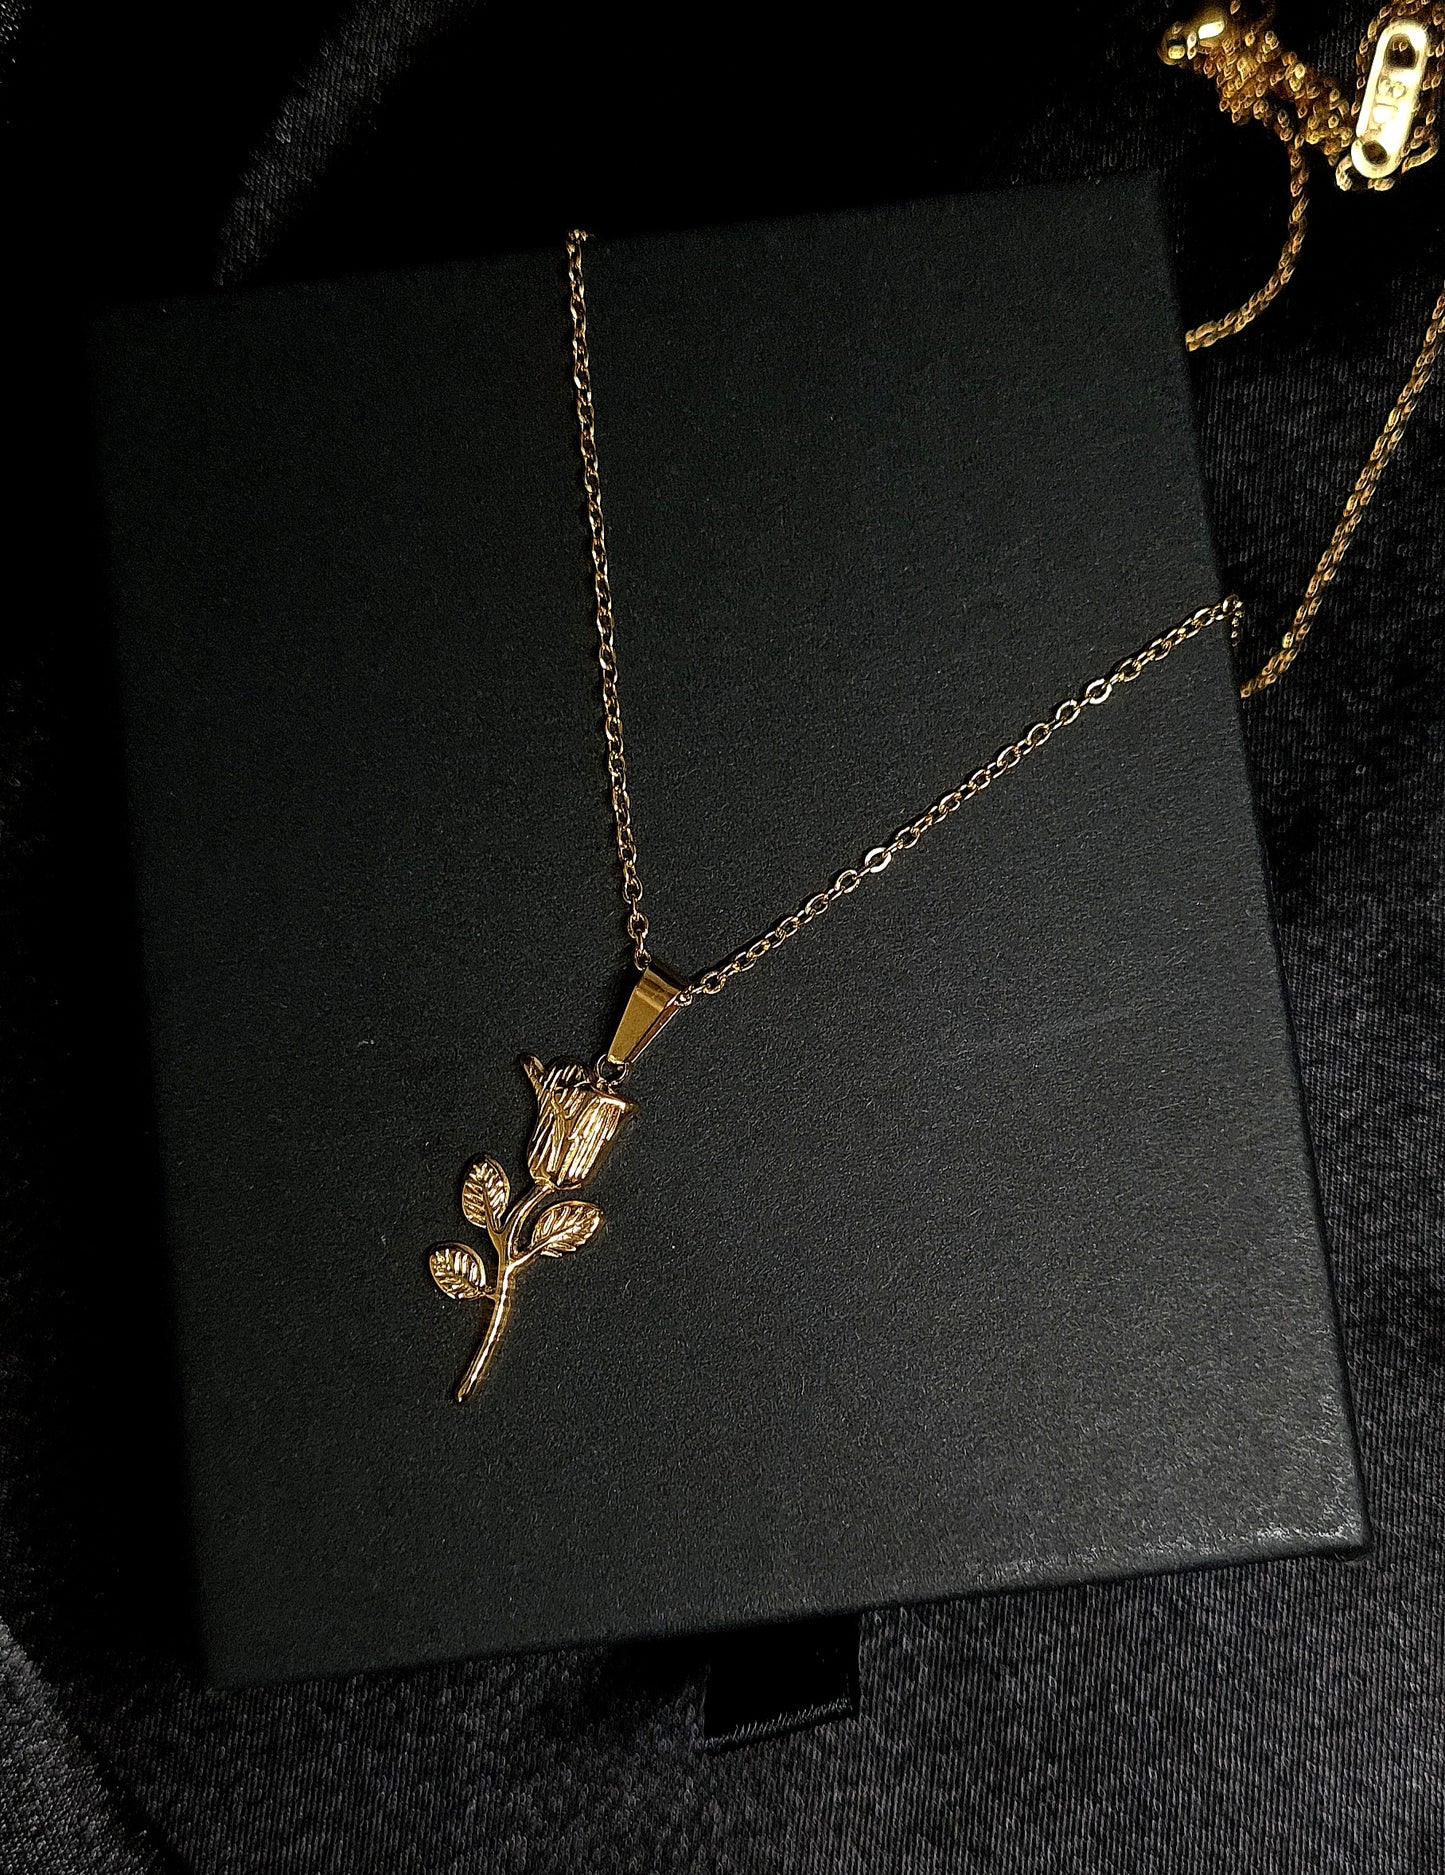 Elegant gold chain Aster necklace featuring a delicate flower pendant